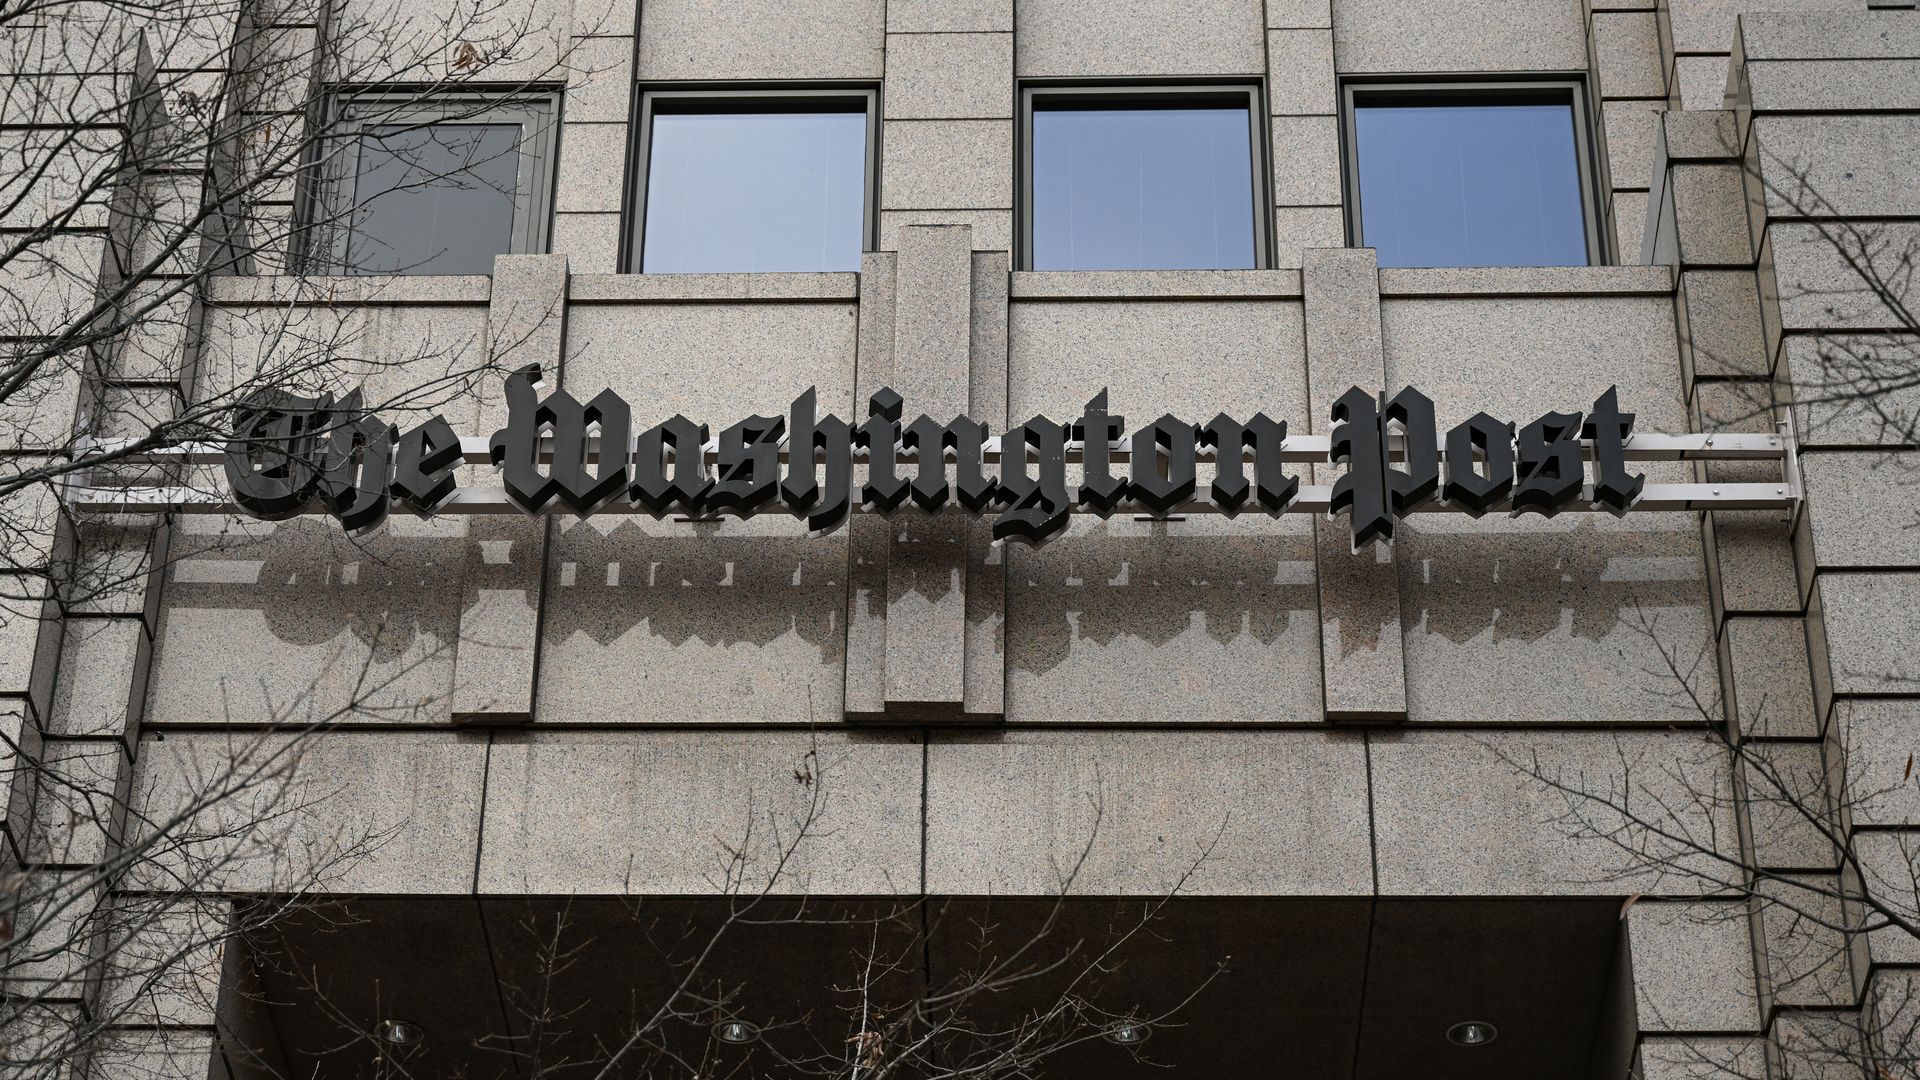 A sign reading "The Washington Post" attached to the outside of an office building.